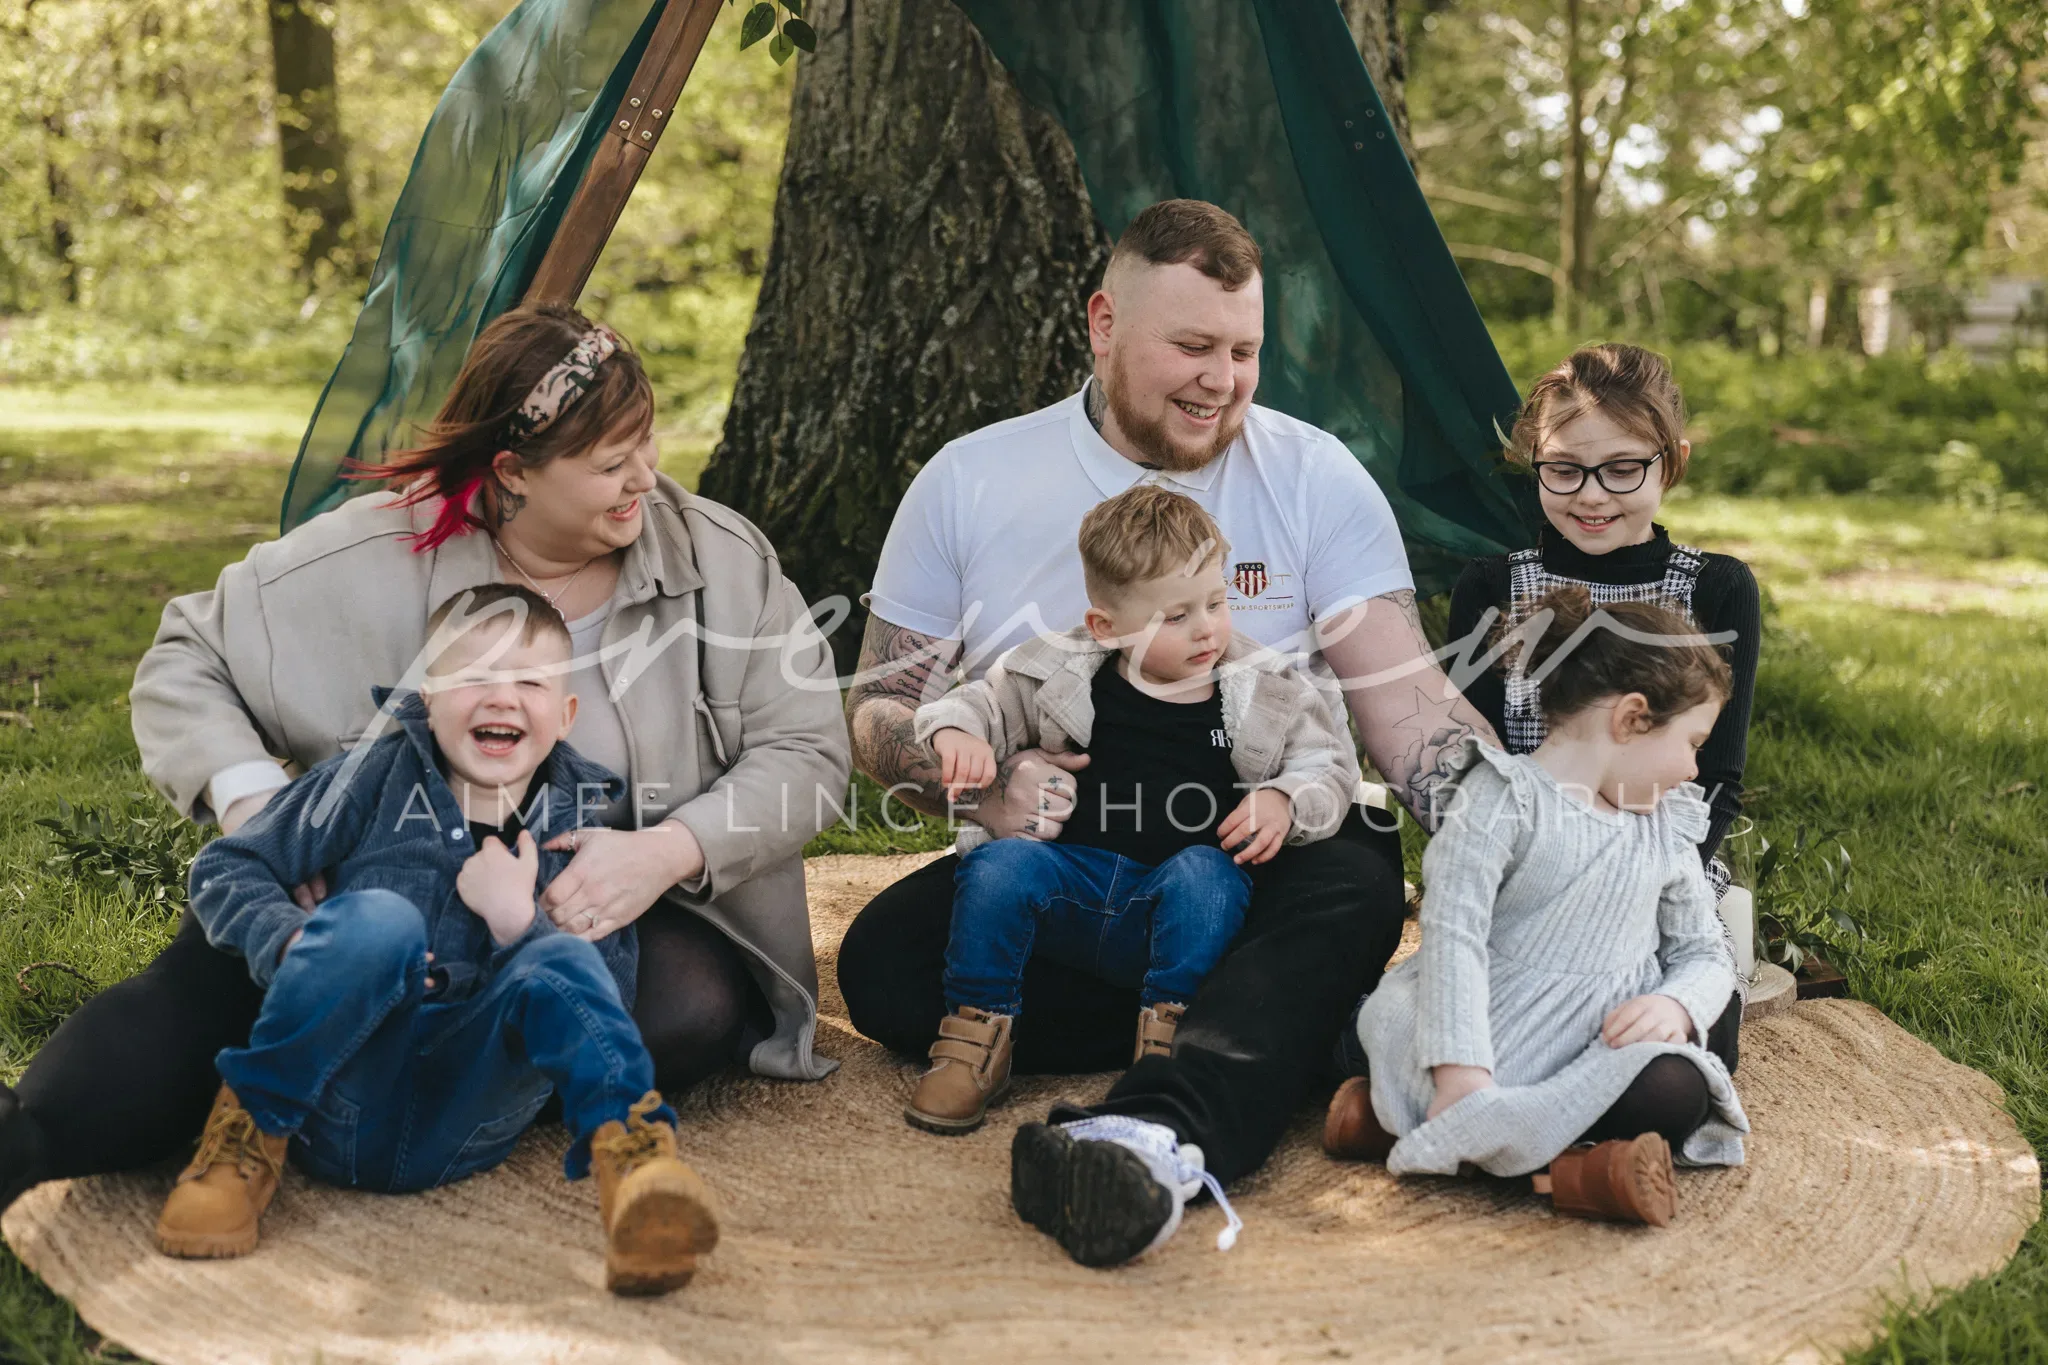 A joyful family of six poses for a Gabrielle photography session on a circular mat under a tree with a tent, laughing together. The parents and four children, including a toddler and an infant, enjoy